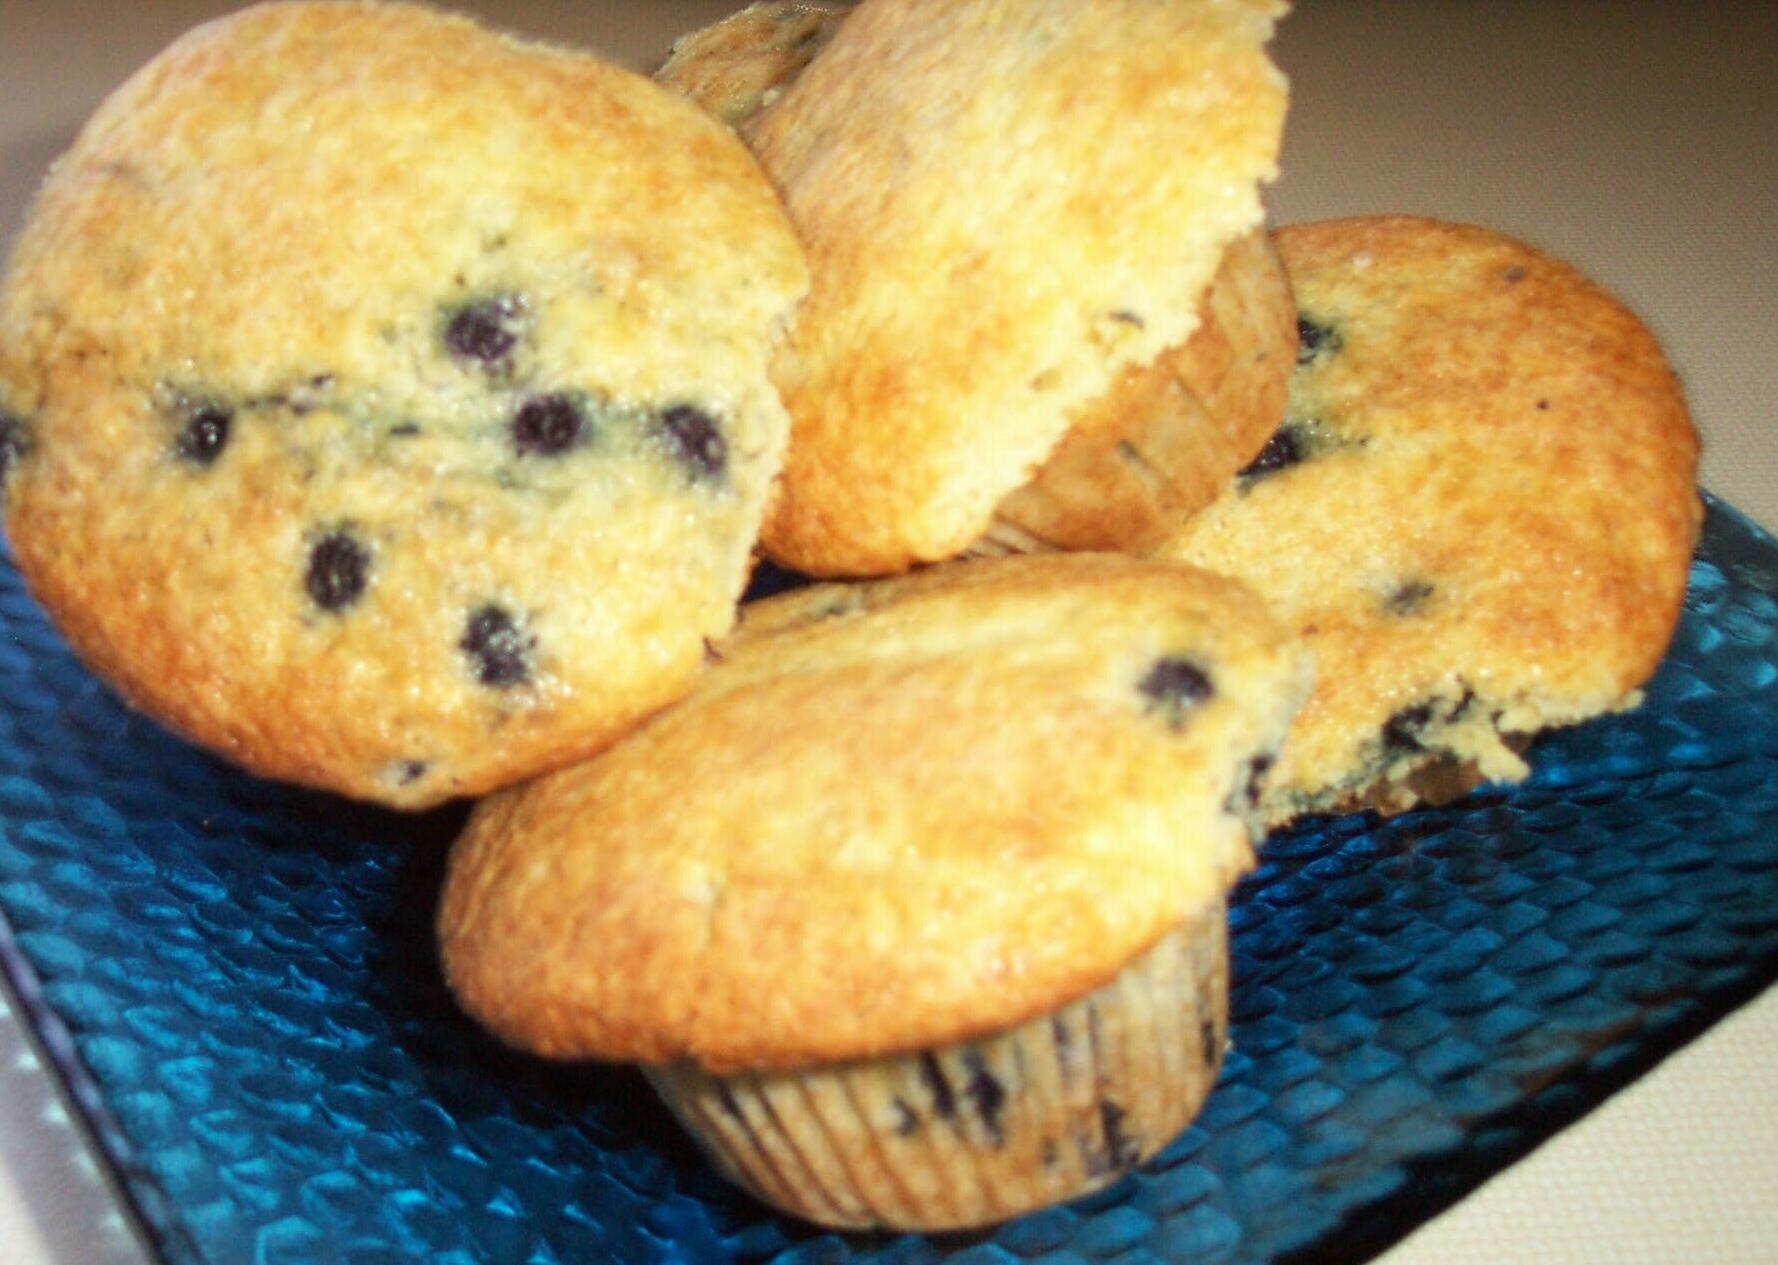  Sink your teeth into these delicious Blueberry Coffee Cake Muffins!